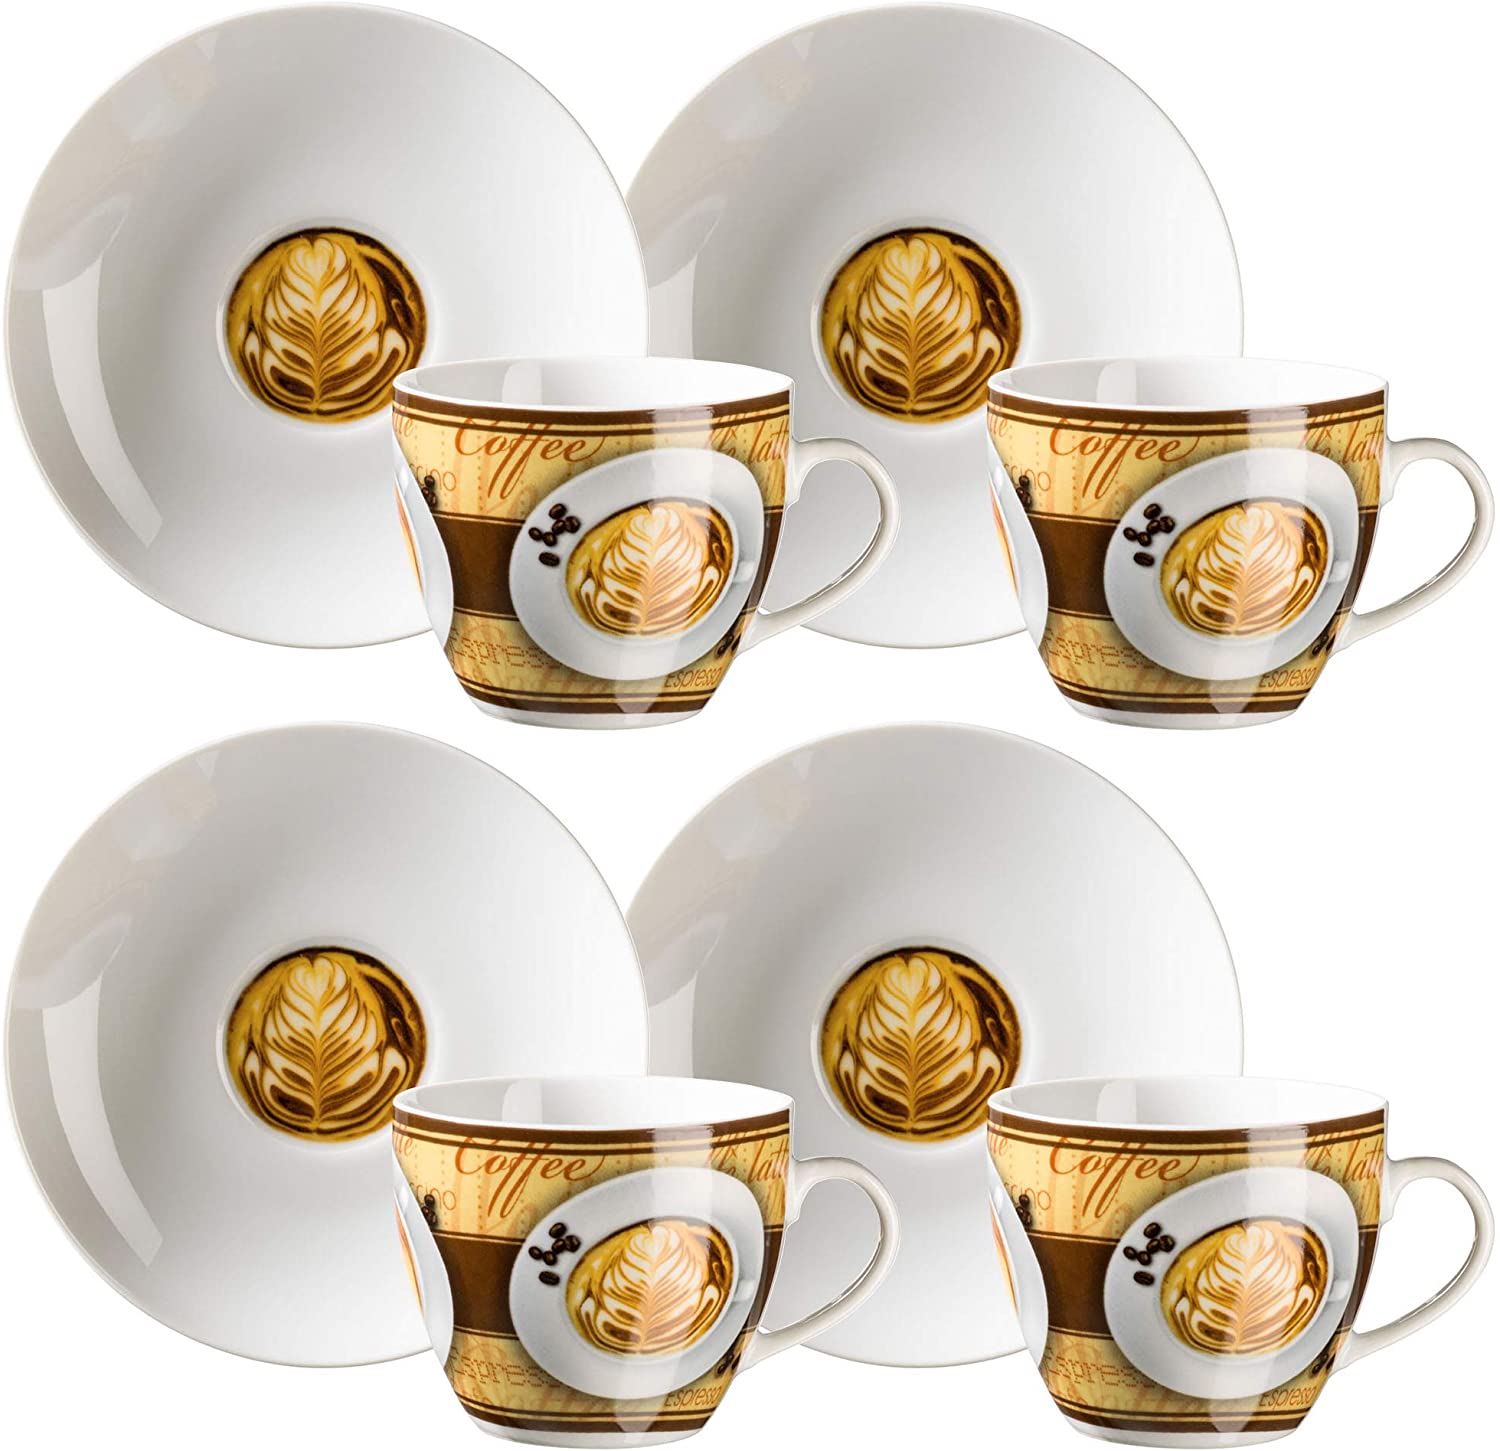 Domestic by Mäser Coffee Fantastic 4 Coffee Cups with Saucers, Set of 8